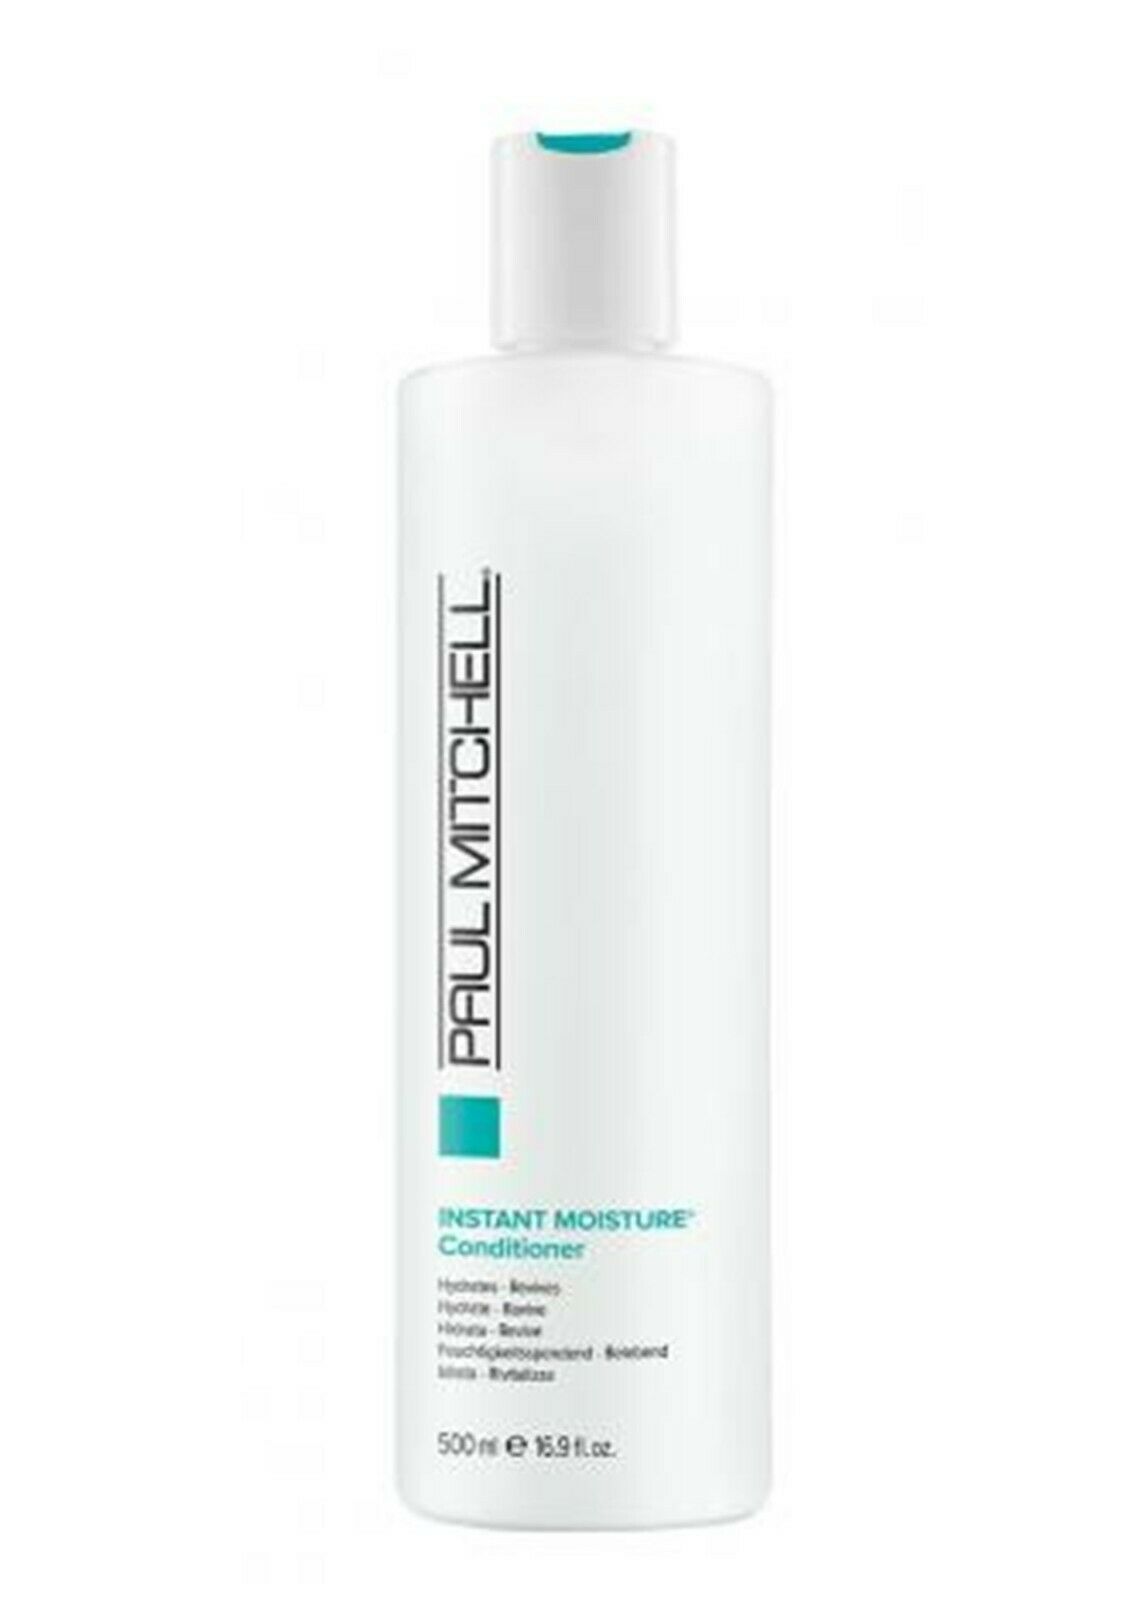 iaahhaircare,Paul Mitchell Instant Moisture Conditioner Treatment 1 Litre,Shampoos & Conditioners,Paul Mitchell